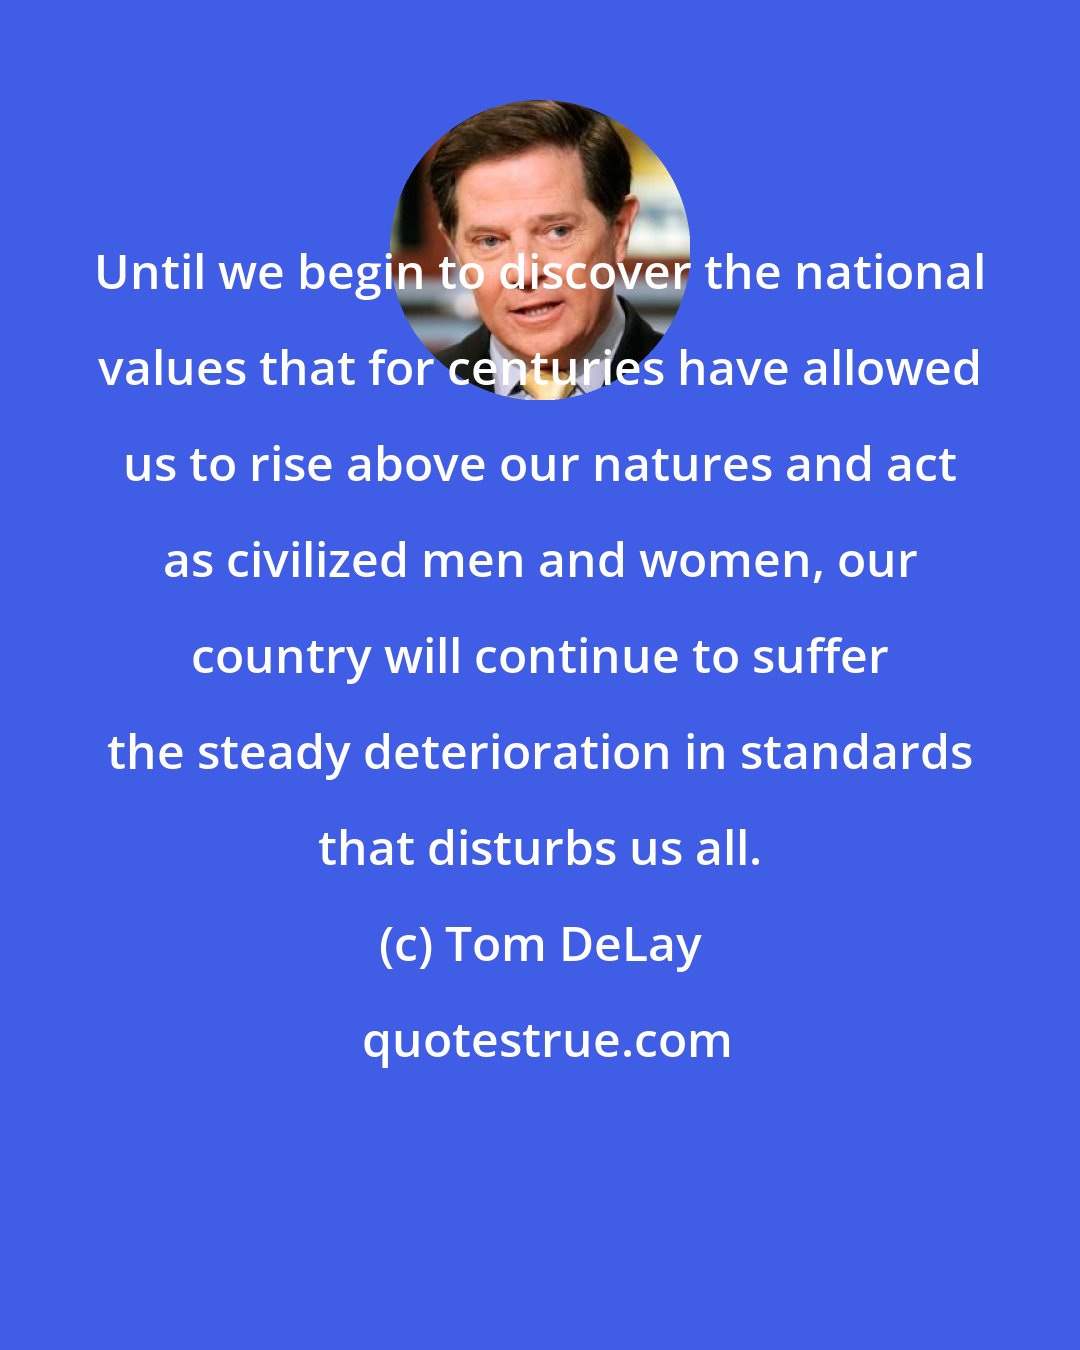 Tom DeLay: Until we begin to discover the national values that for centuries have allowed us to rise above our natures and act as civilized men and women, our country will continue to suffer the steady deterioration in standards that disturbs us all.